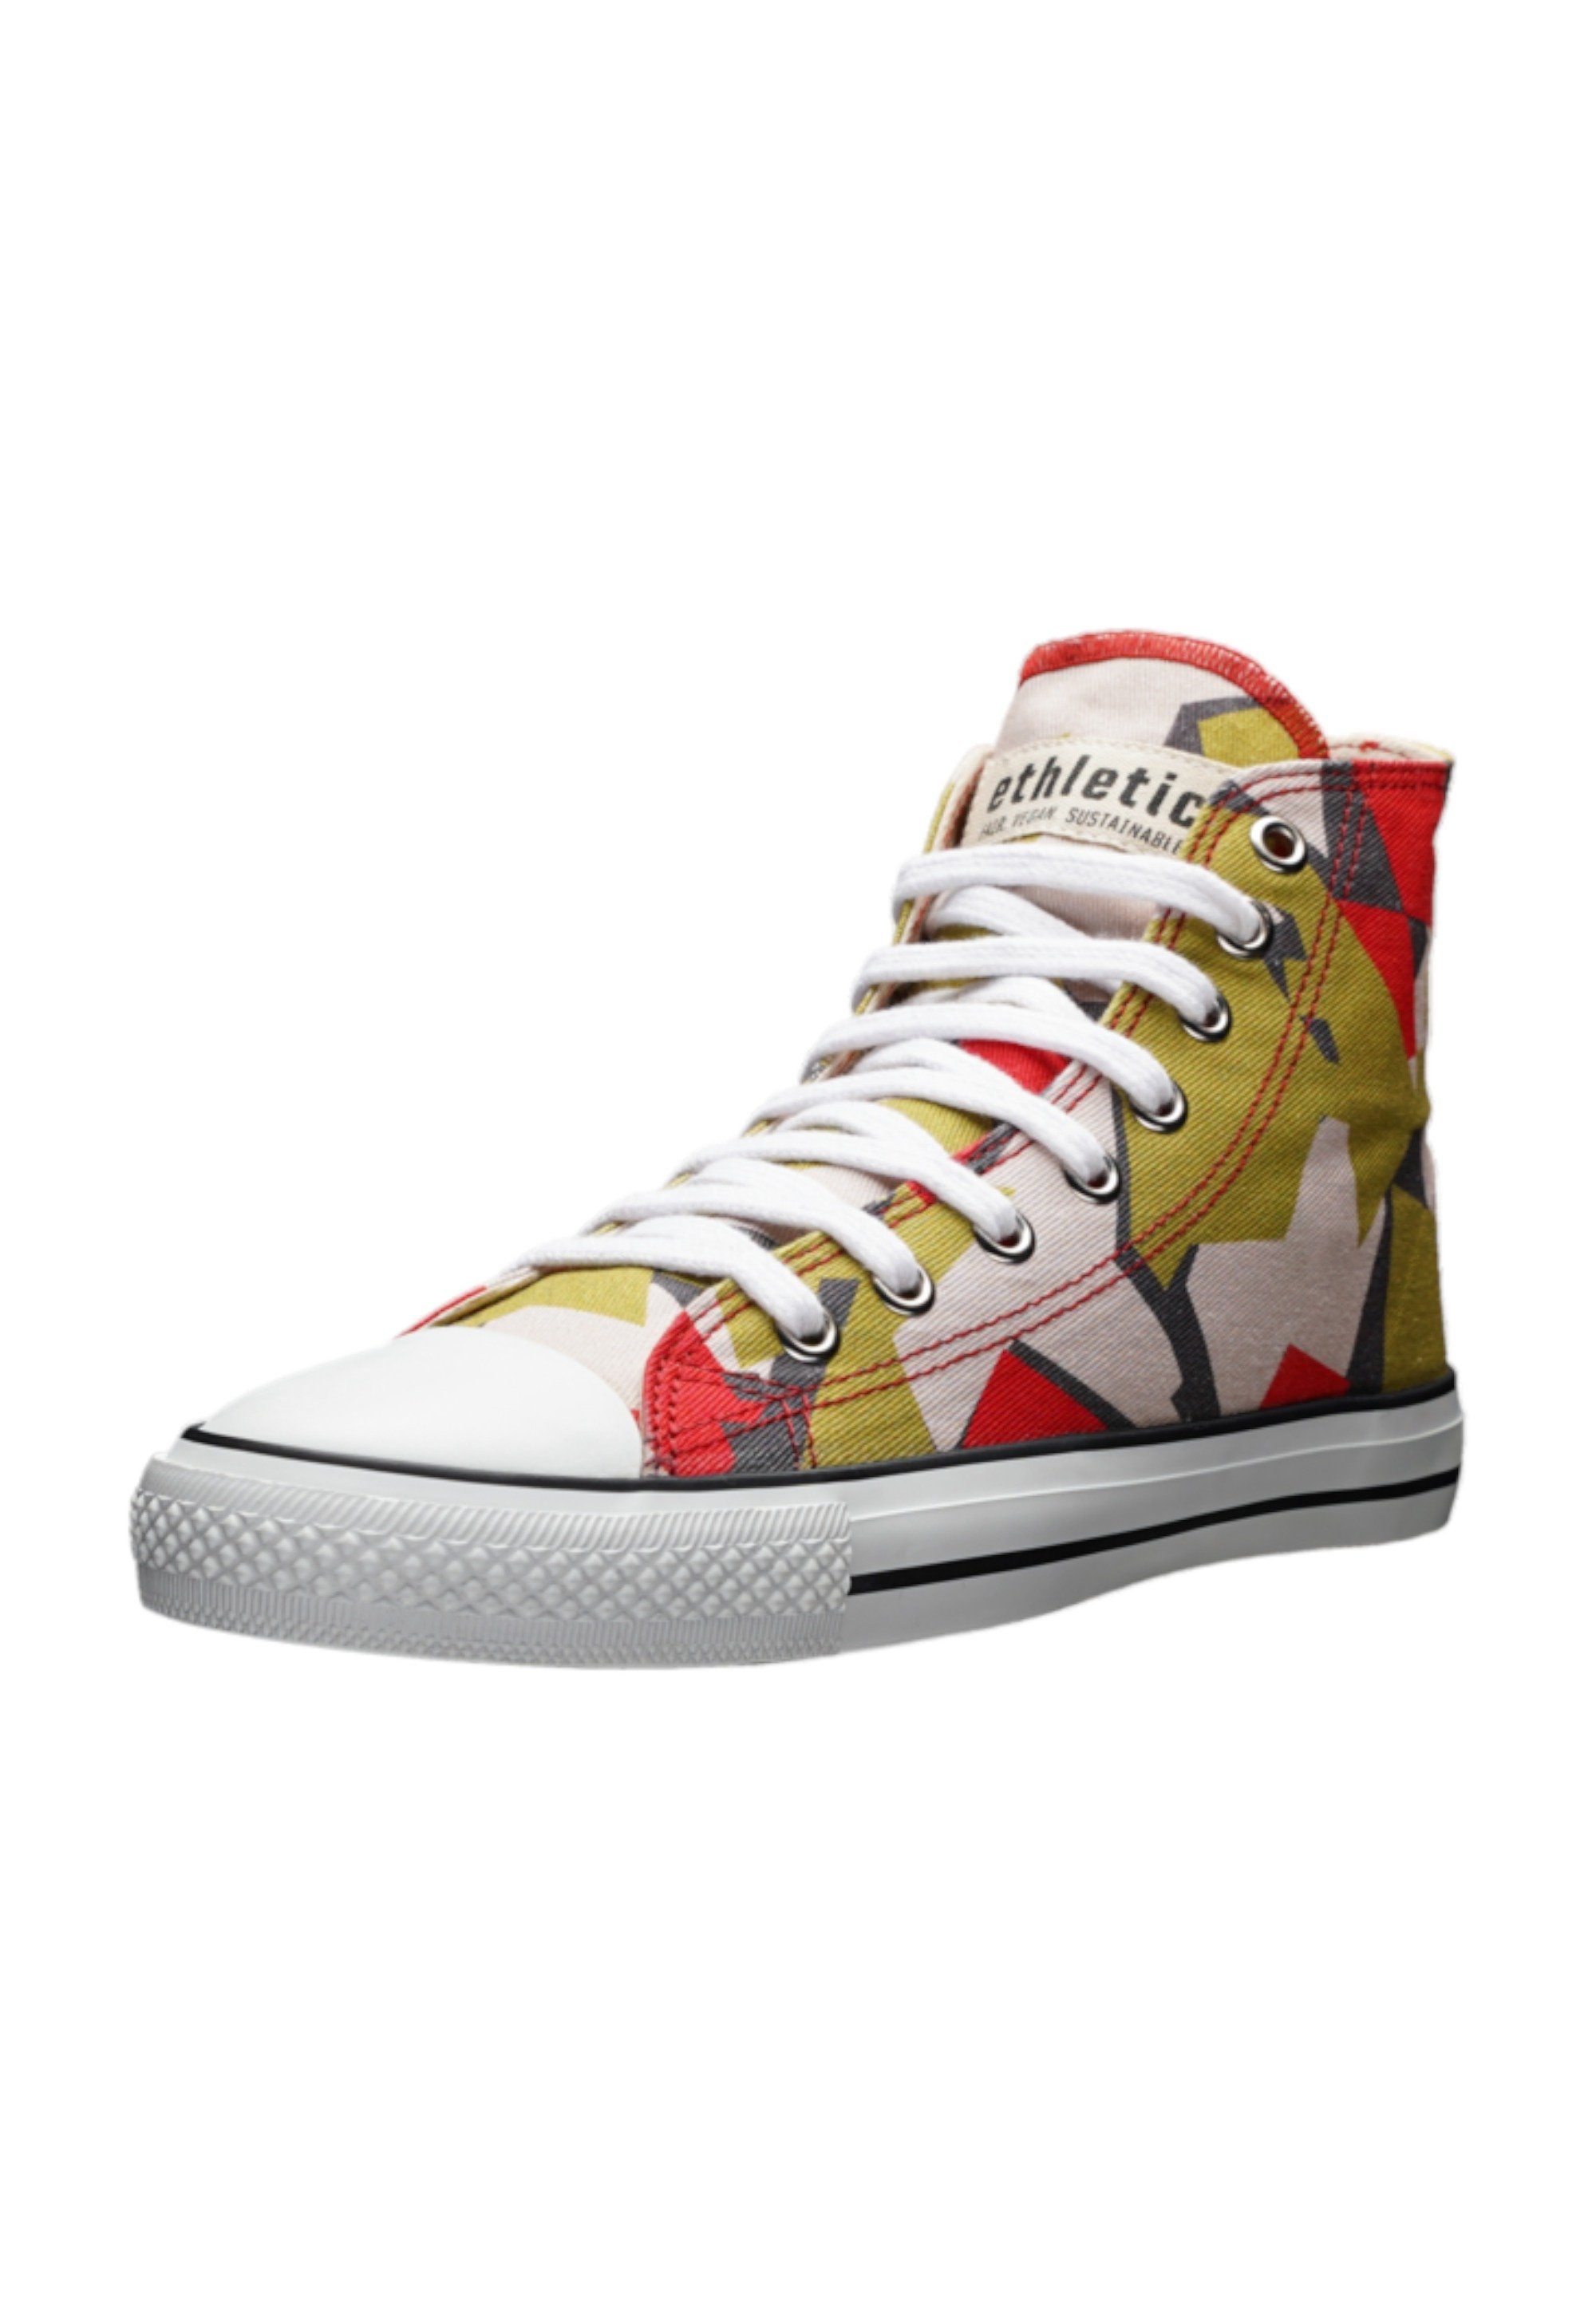 ETHLETIC White Cap Hi Cut Sneaker Fairtrade Produkt Camou Red - Just White